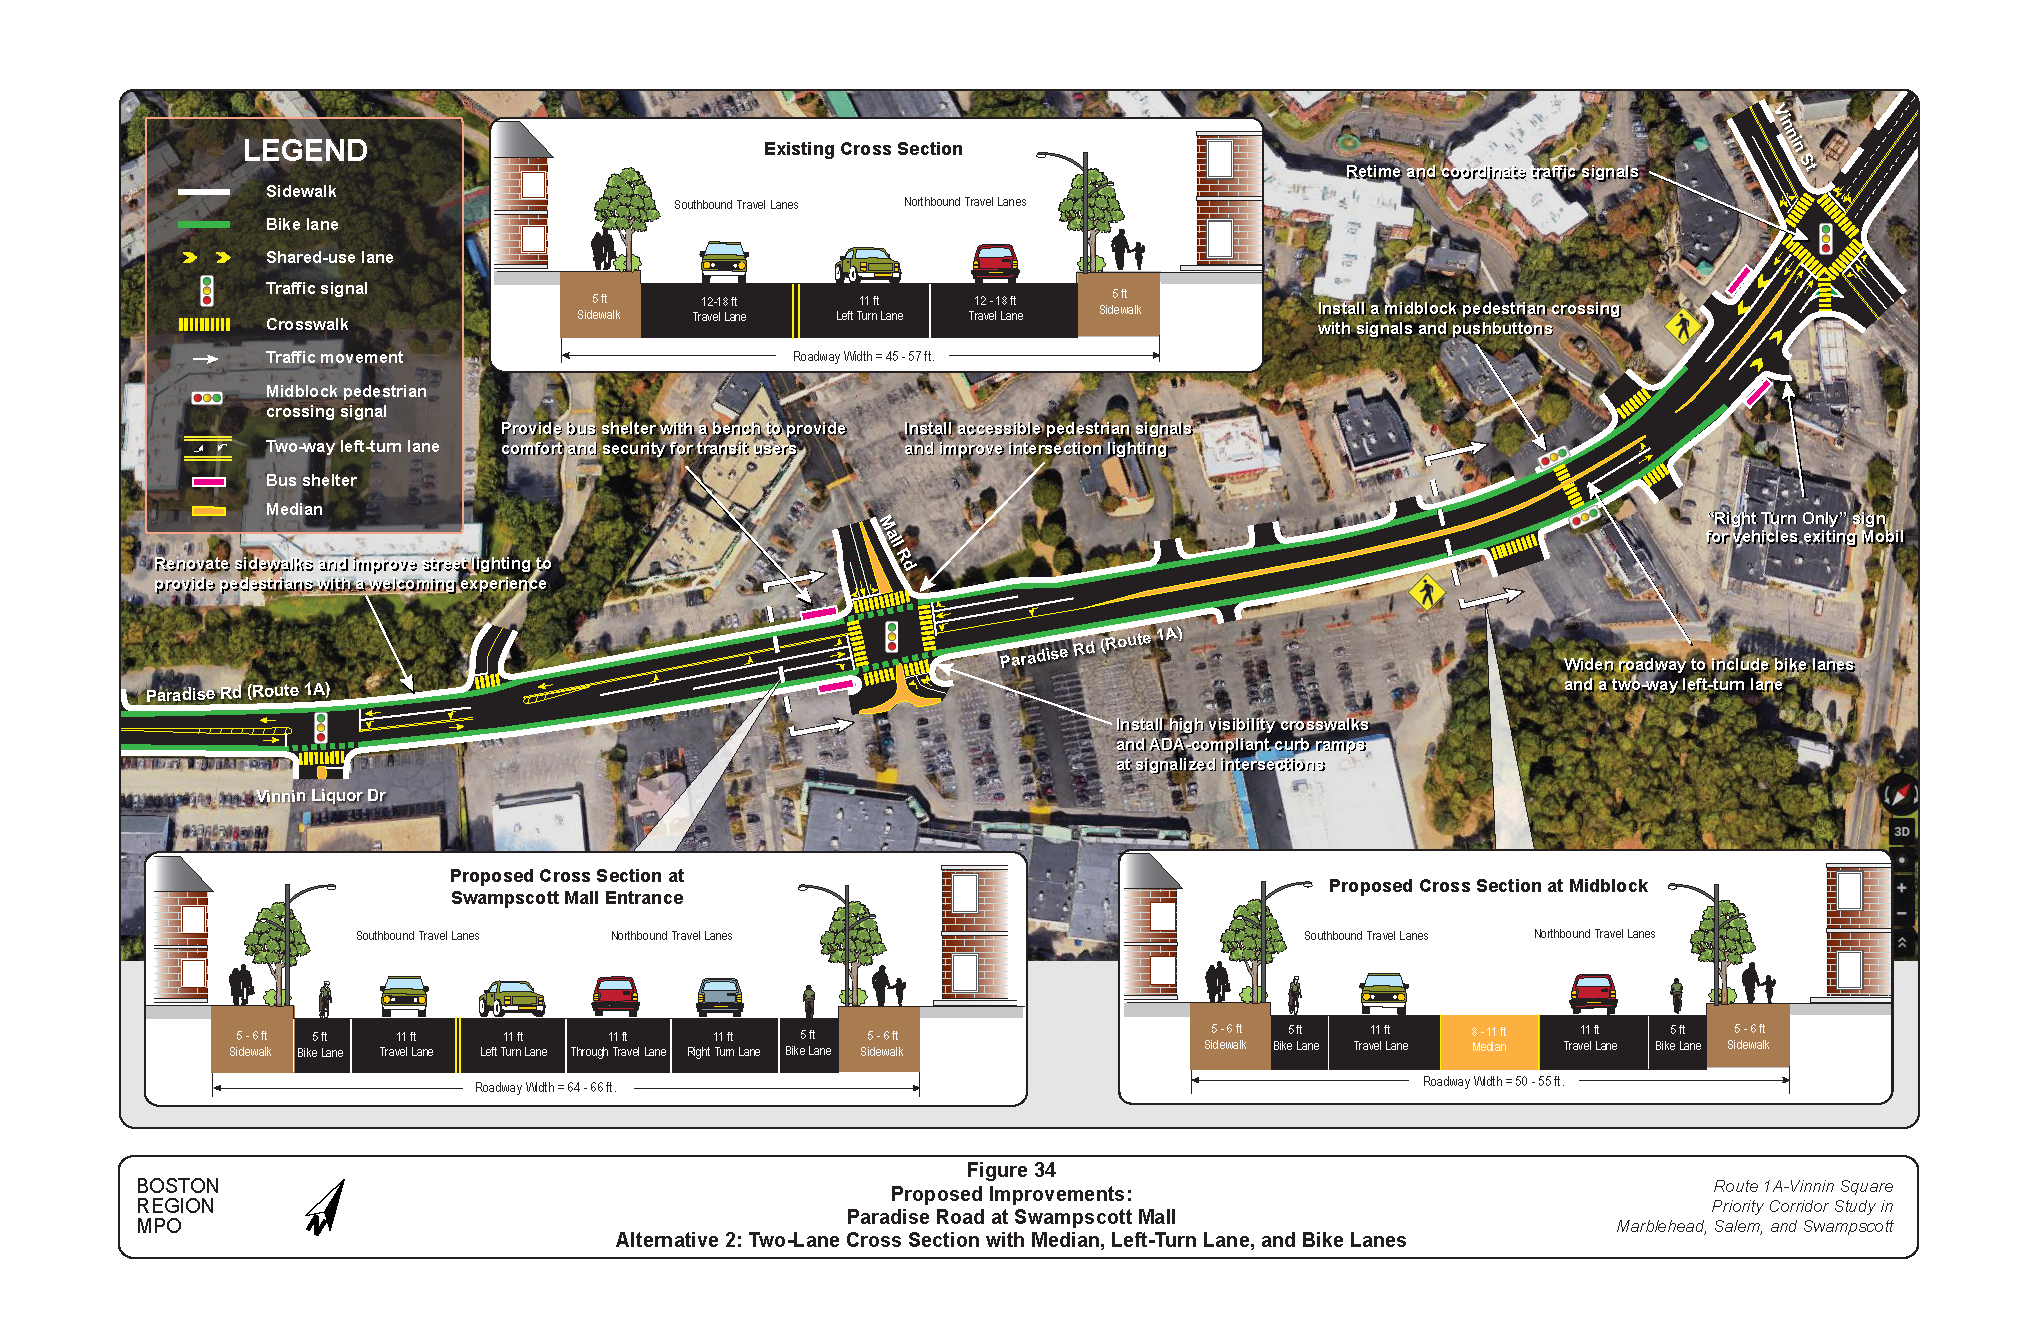 FIGURE 34. Proposed Improvements, Alternative 2: Paradise Road at Swampscott Mall.Figure 34 is a map of Paradise Road at Swampscott Mall showing the location of proposed improvements in Alternative 2. The proposed improvements are described in text boxes. Graphics embedded show proposed roadway cross sections with lane widths.